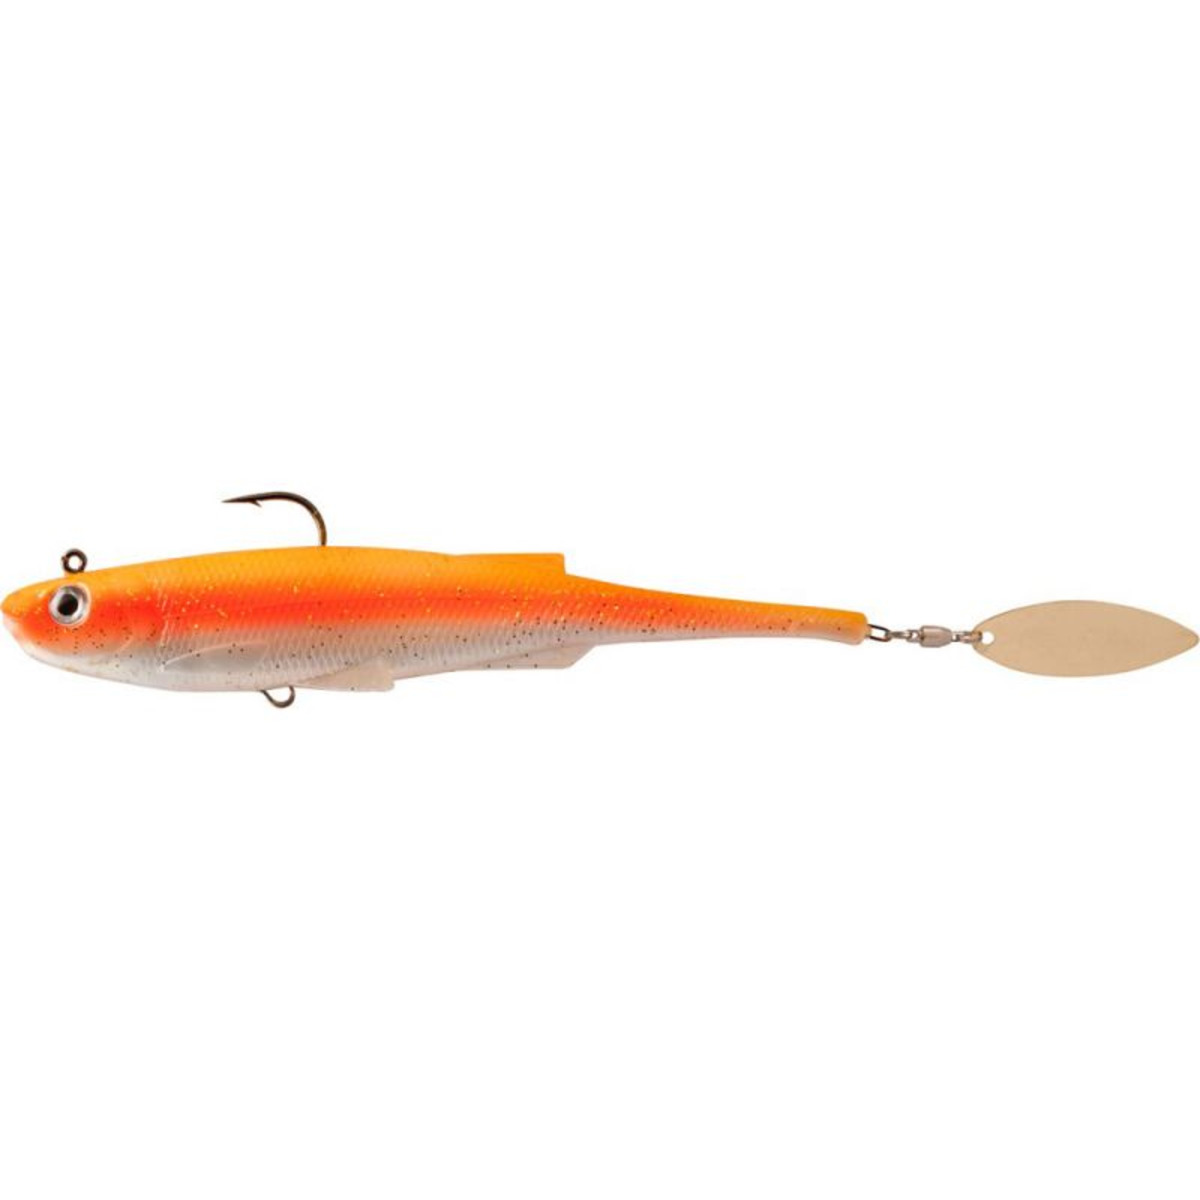 Rapture Mad Spintail Shad - 60.0 g - 150 mm - HS